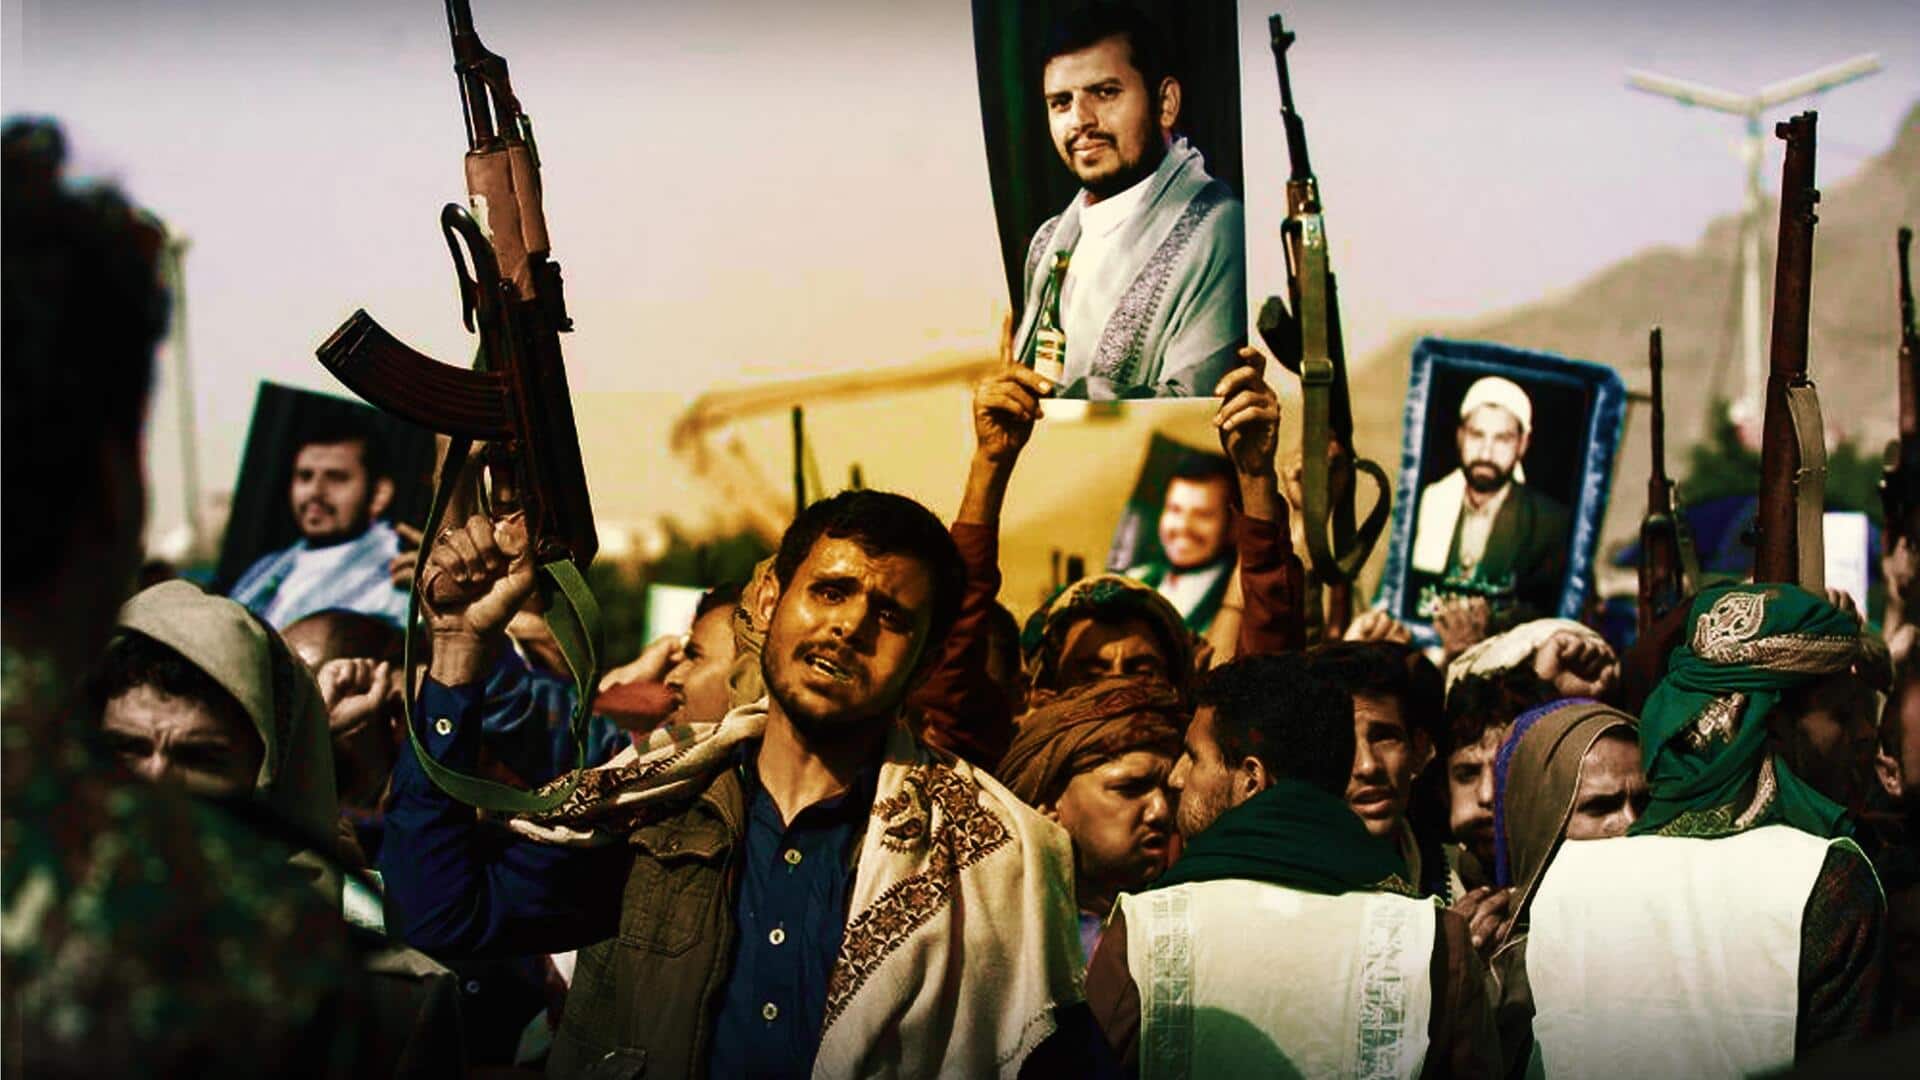 Who are Houthis? Yemen-based rebels attacking ships in Red Sea